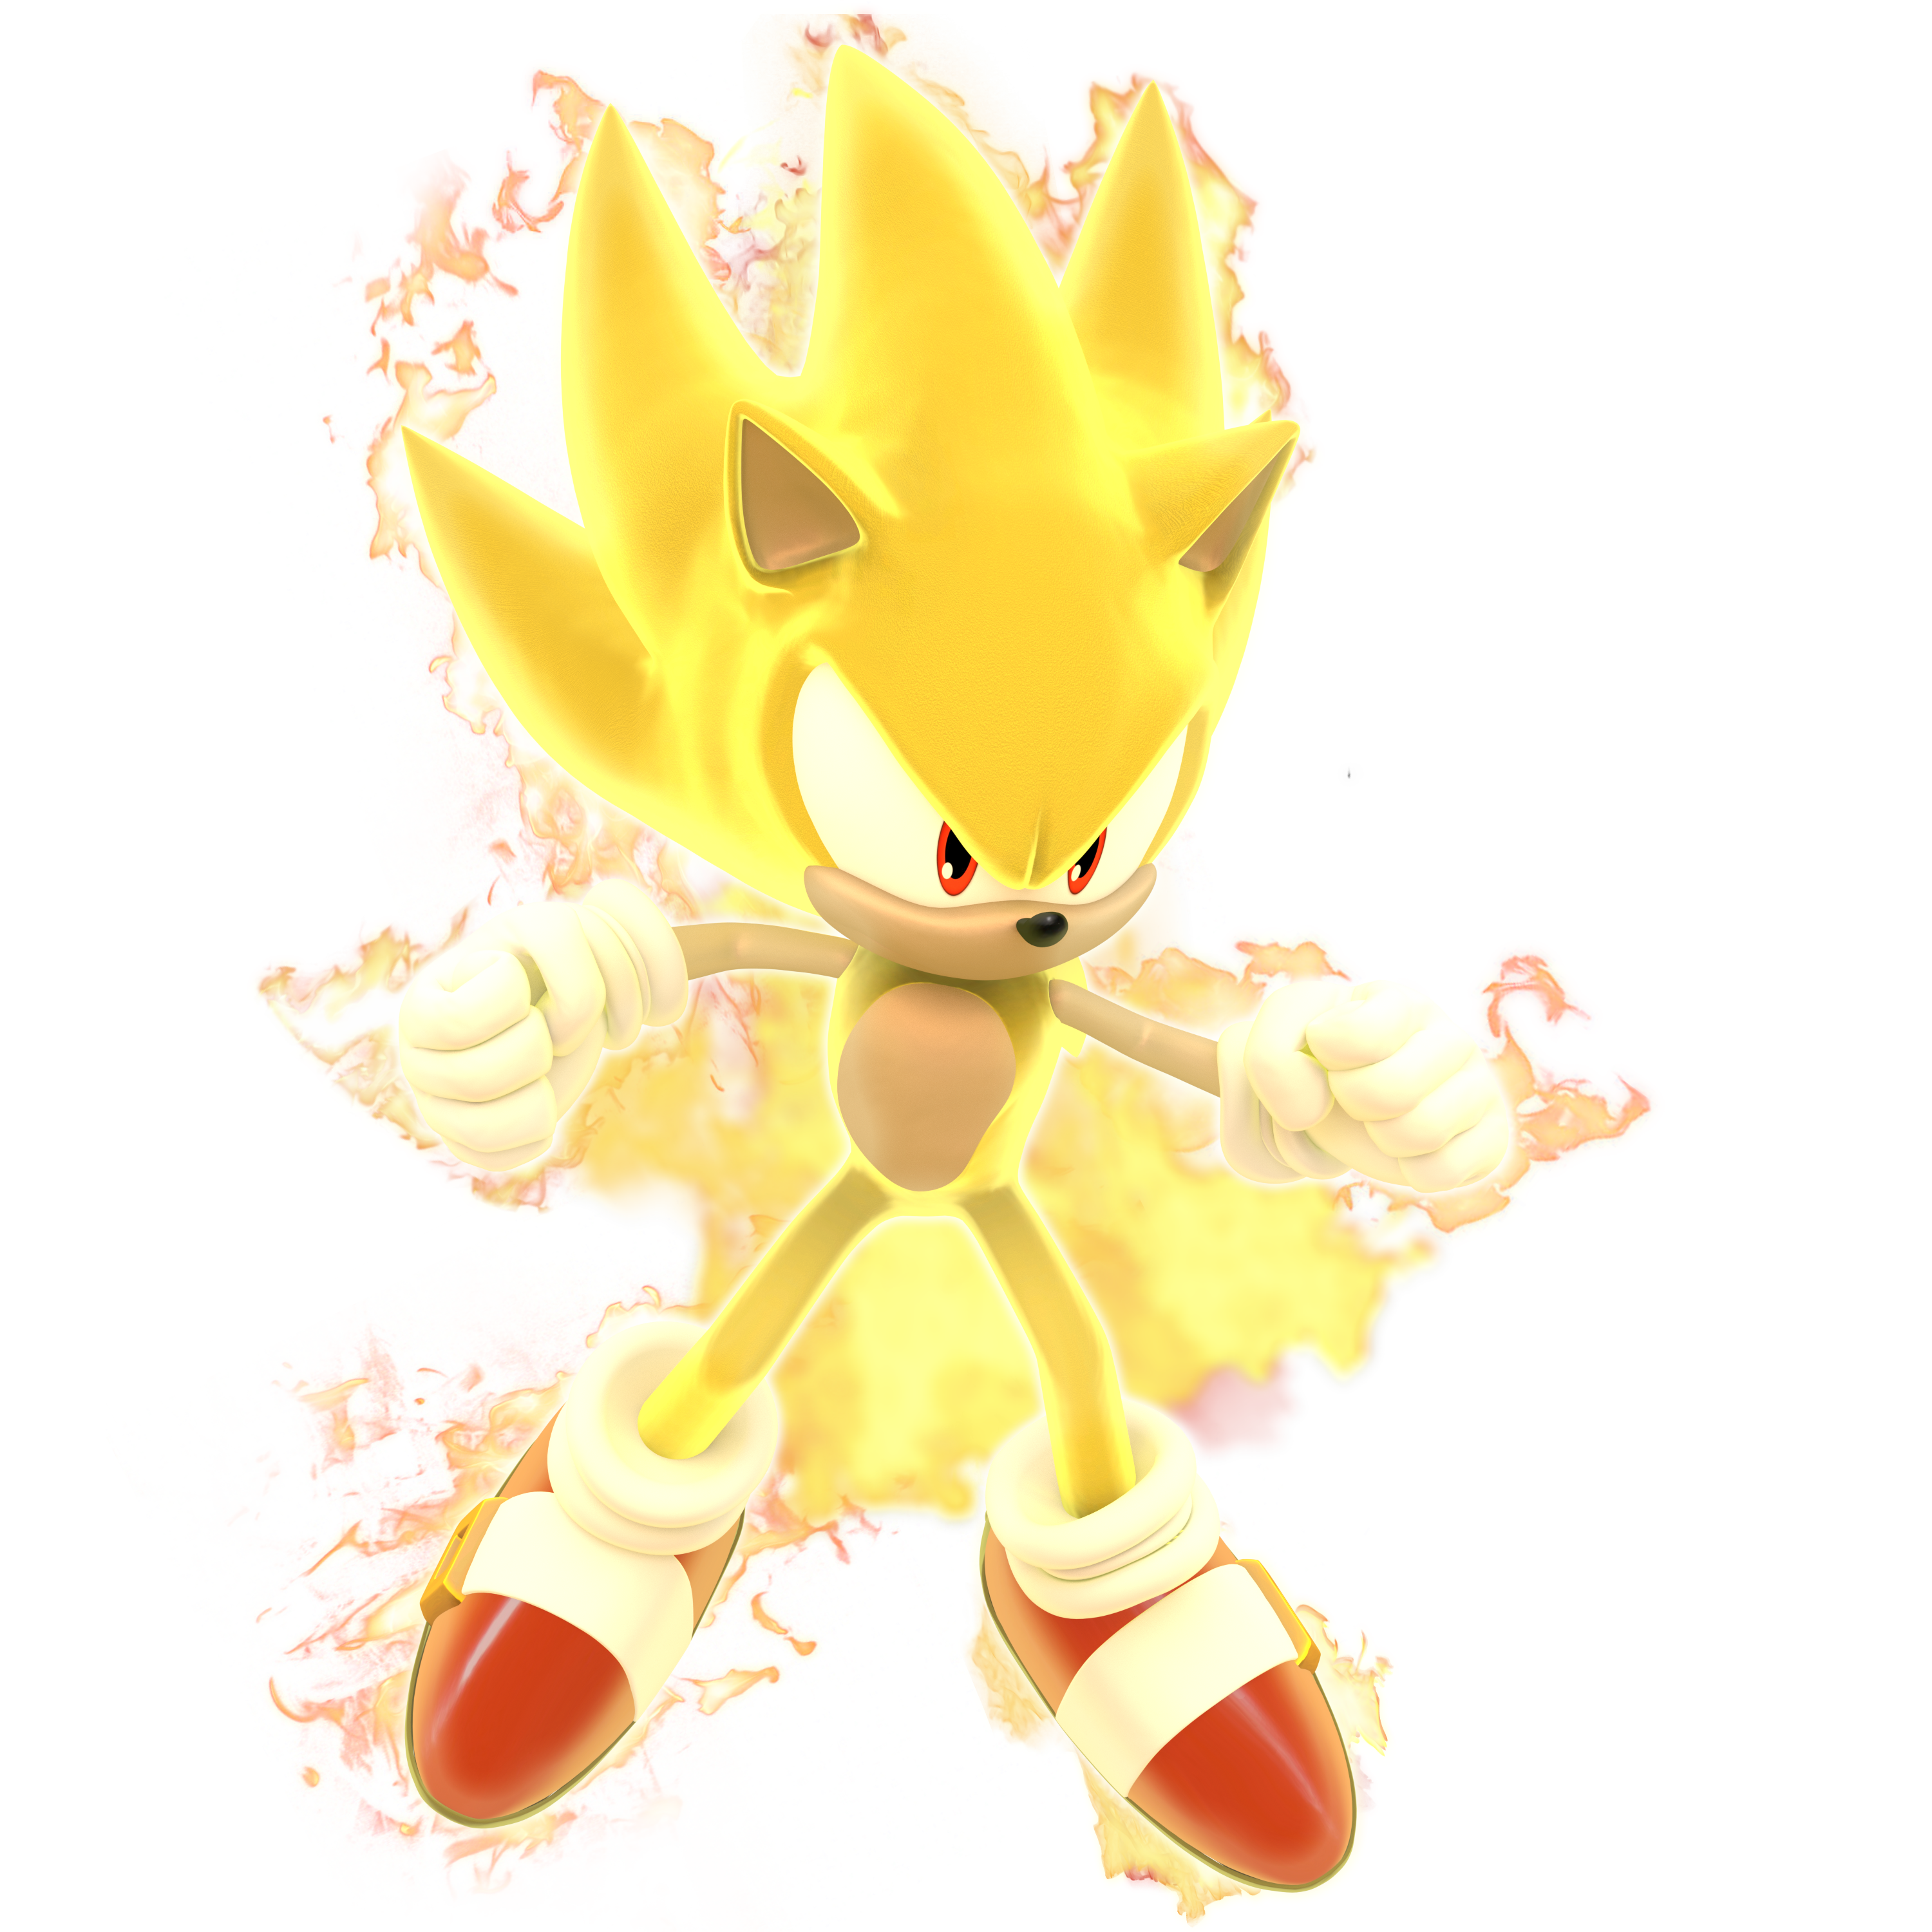 Super Sonic  Sonic unleashed, Sonic, Sonic the hedgehog